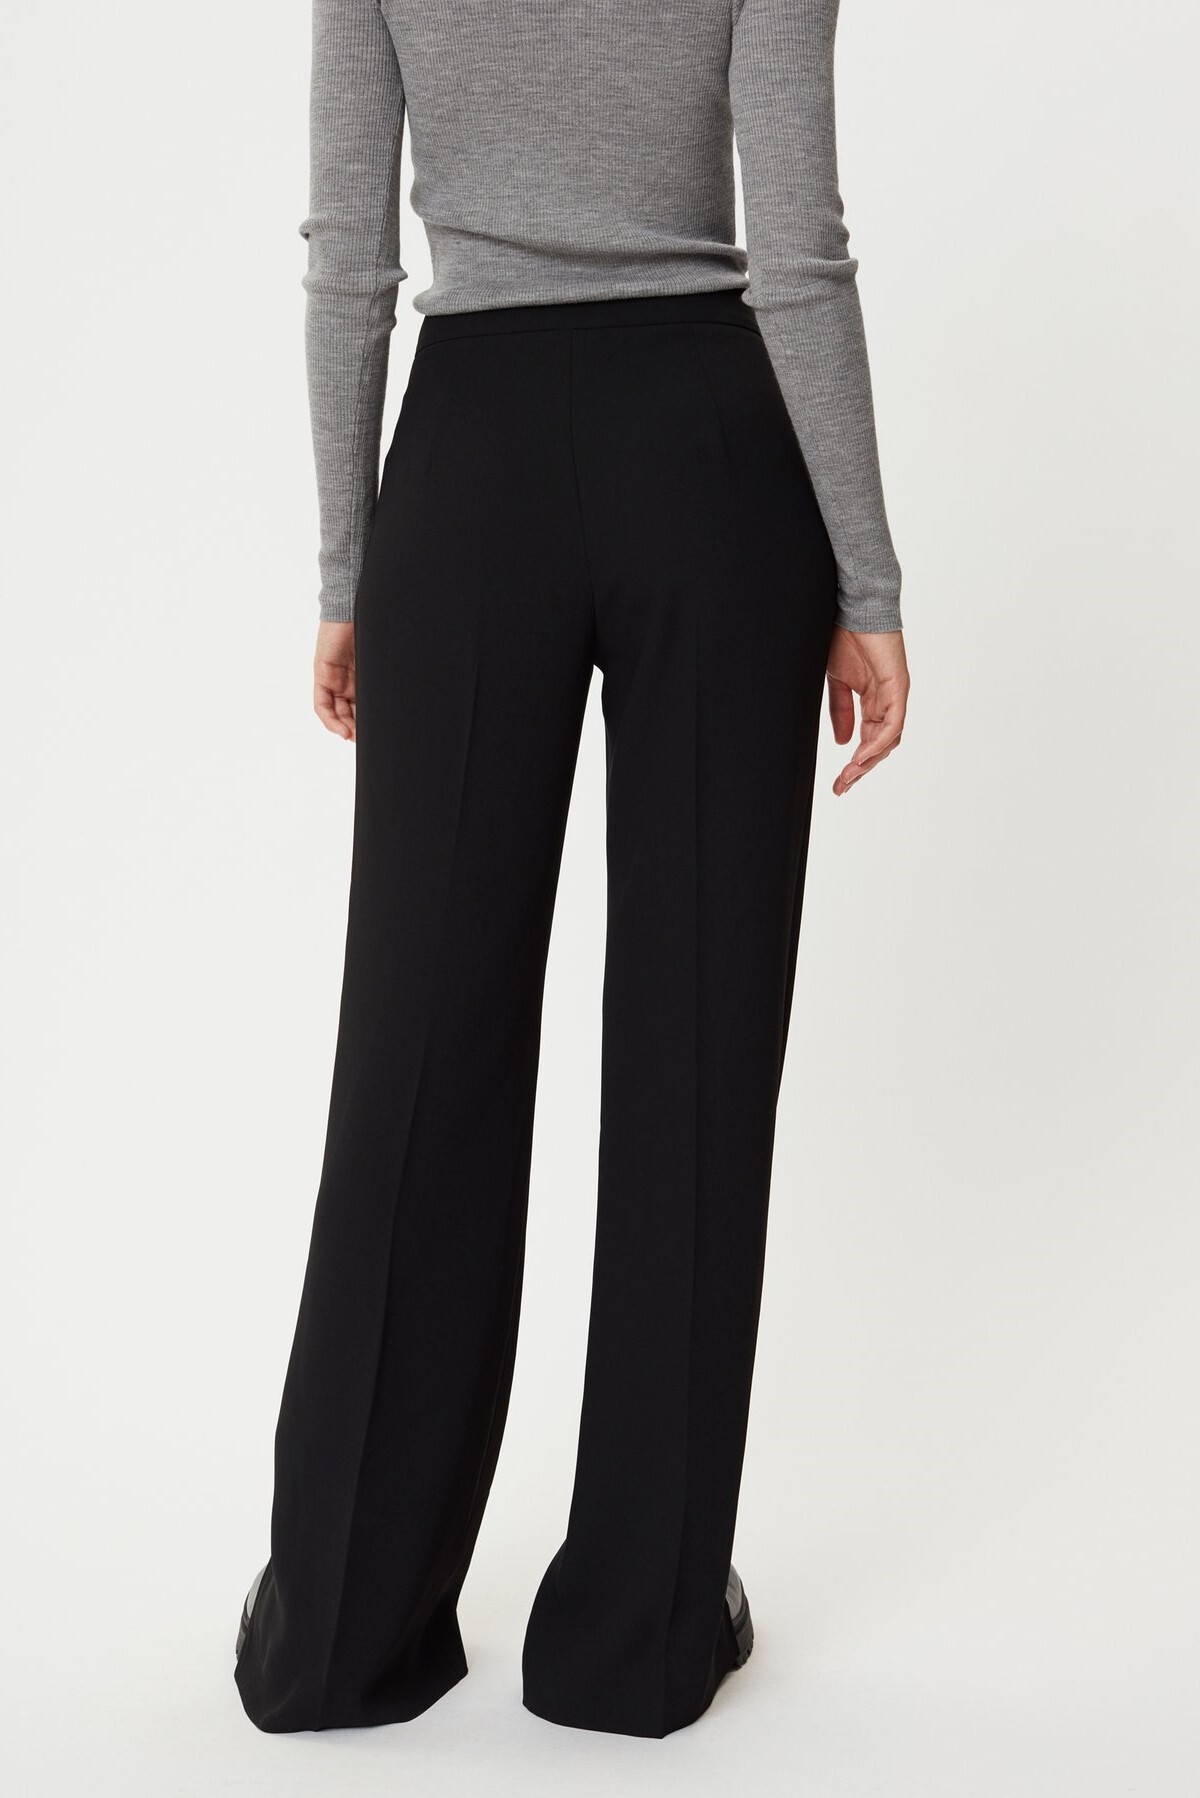 CLASSIC GABARDINE TROUSERS (BLACK)- DAY BIRGER WINTER 21 Boxing Day Sale